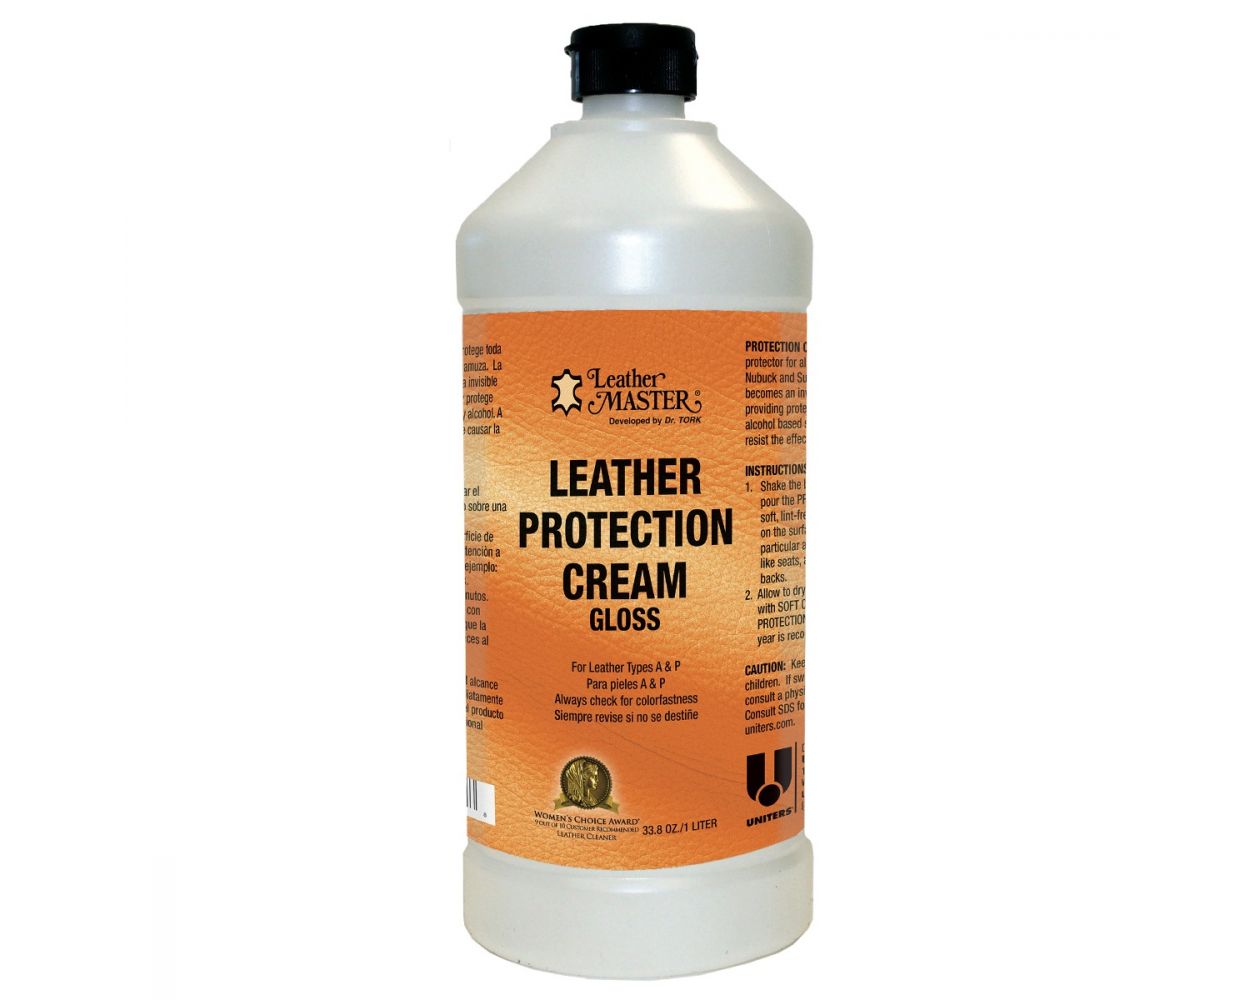 Leather Master Leather Protection Cream Gloss